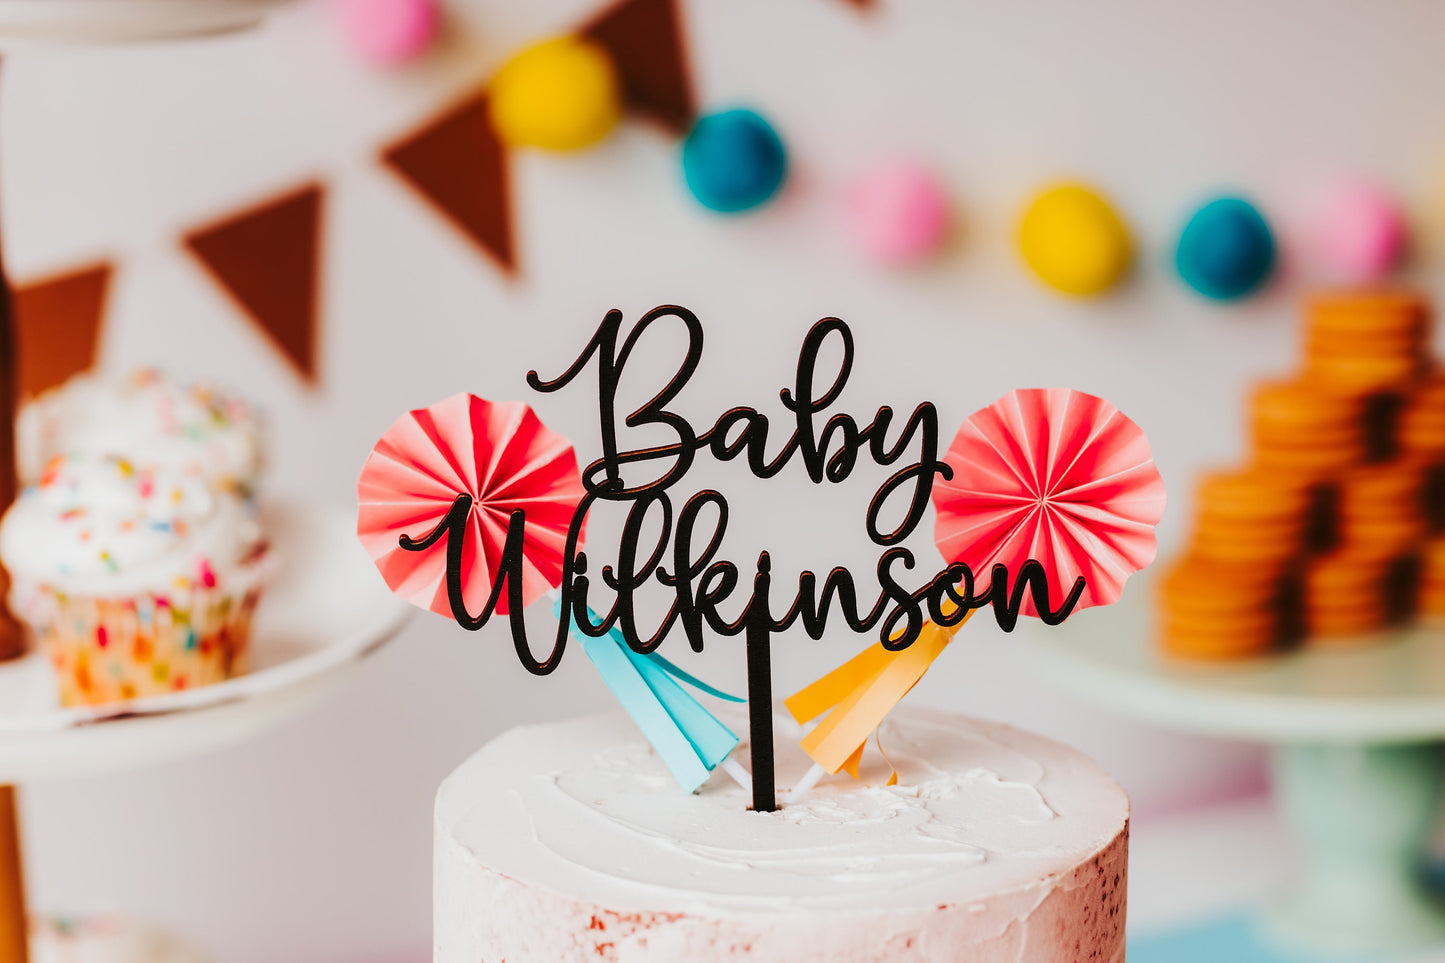 Gold First Name Last Name Custom Baby Shower Cake Topper Decorations, Rose Gold Black Silver Baby Boy Cake Decor For Baby Girl Sprinkle